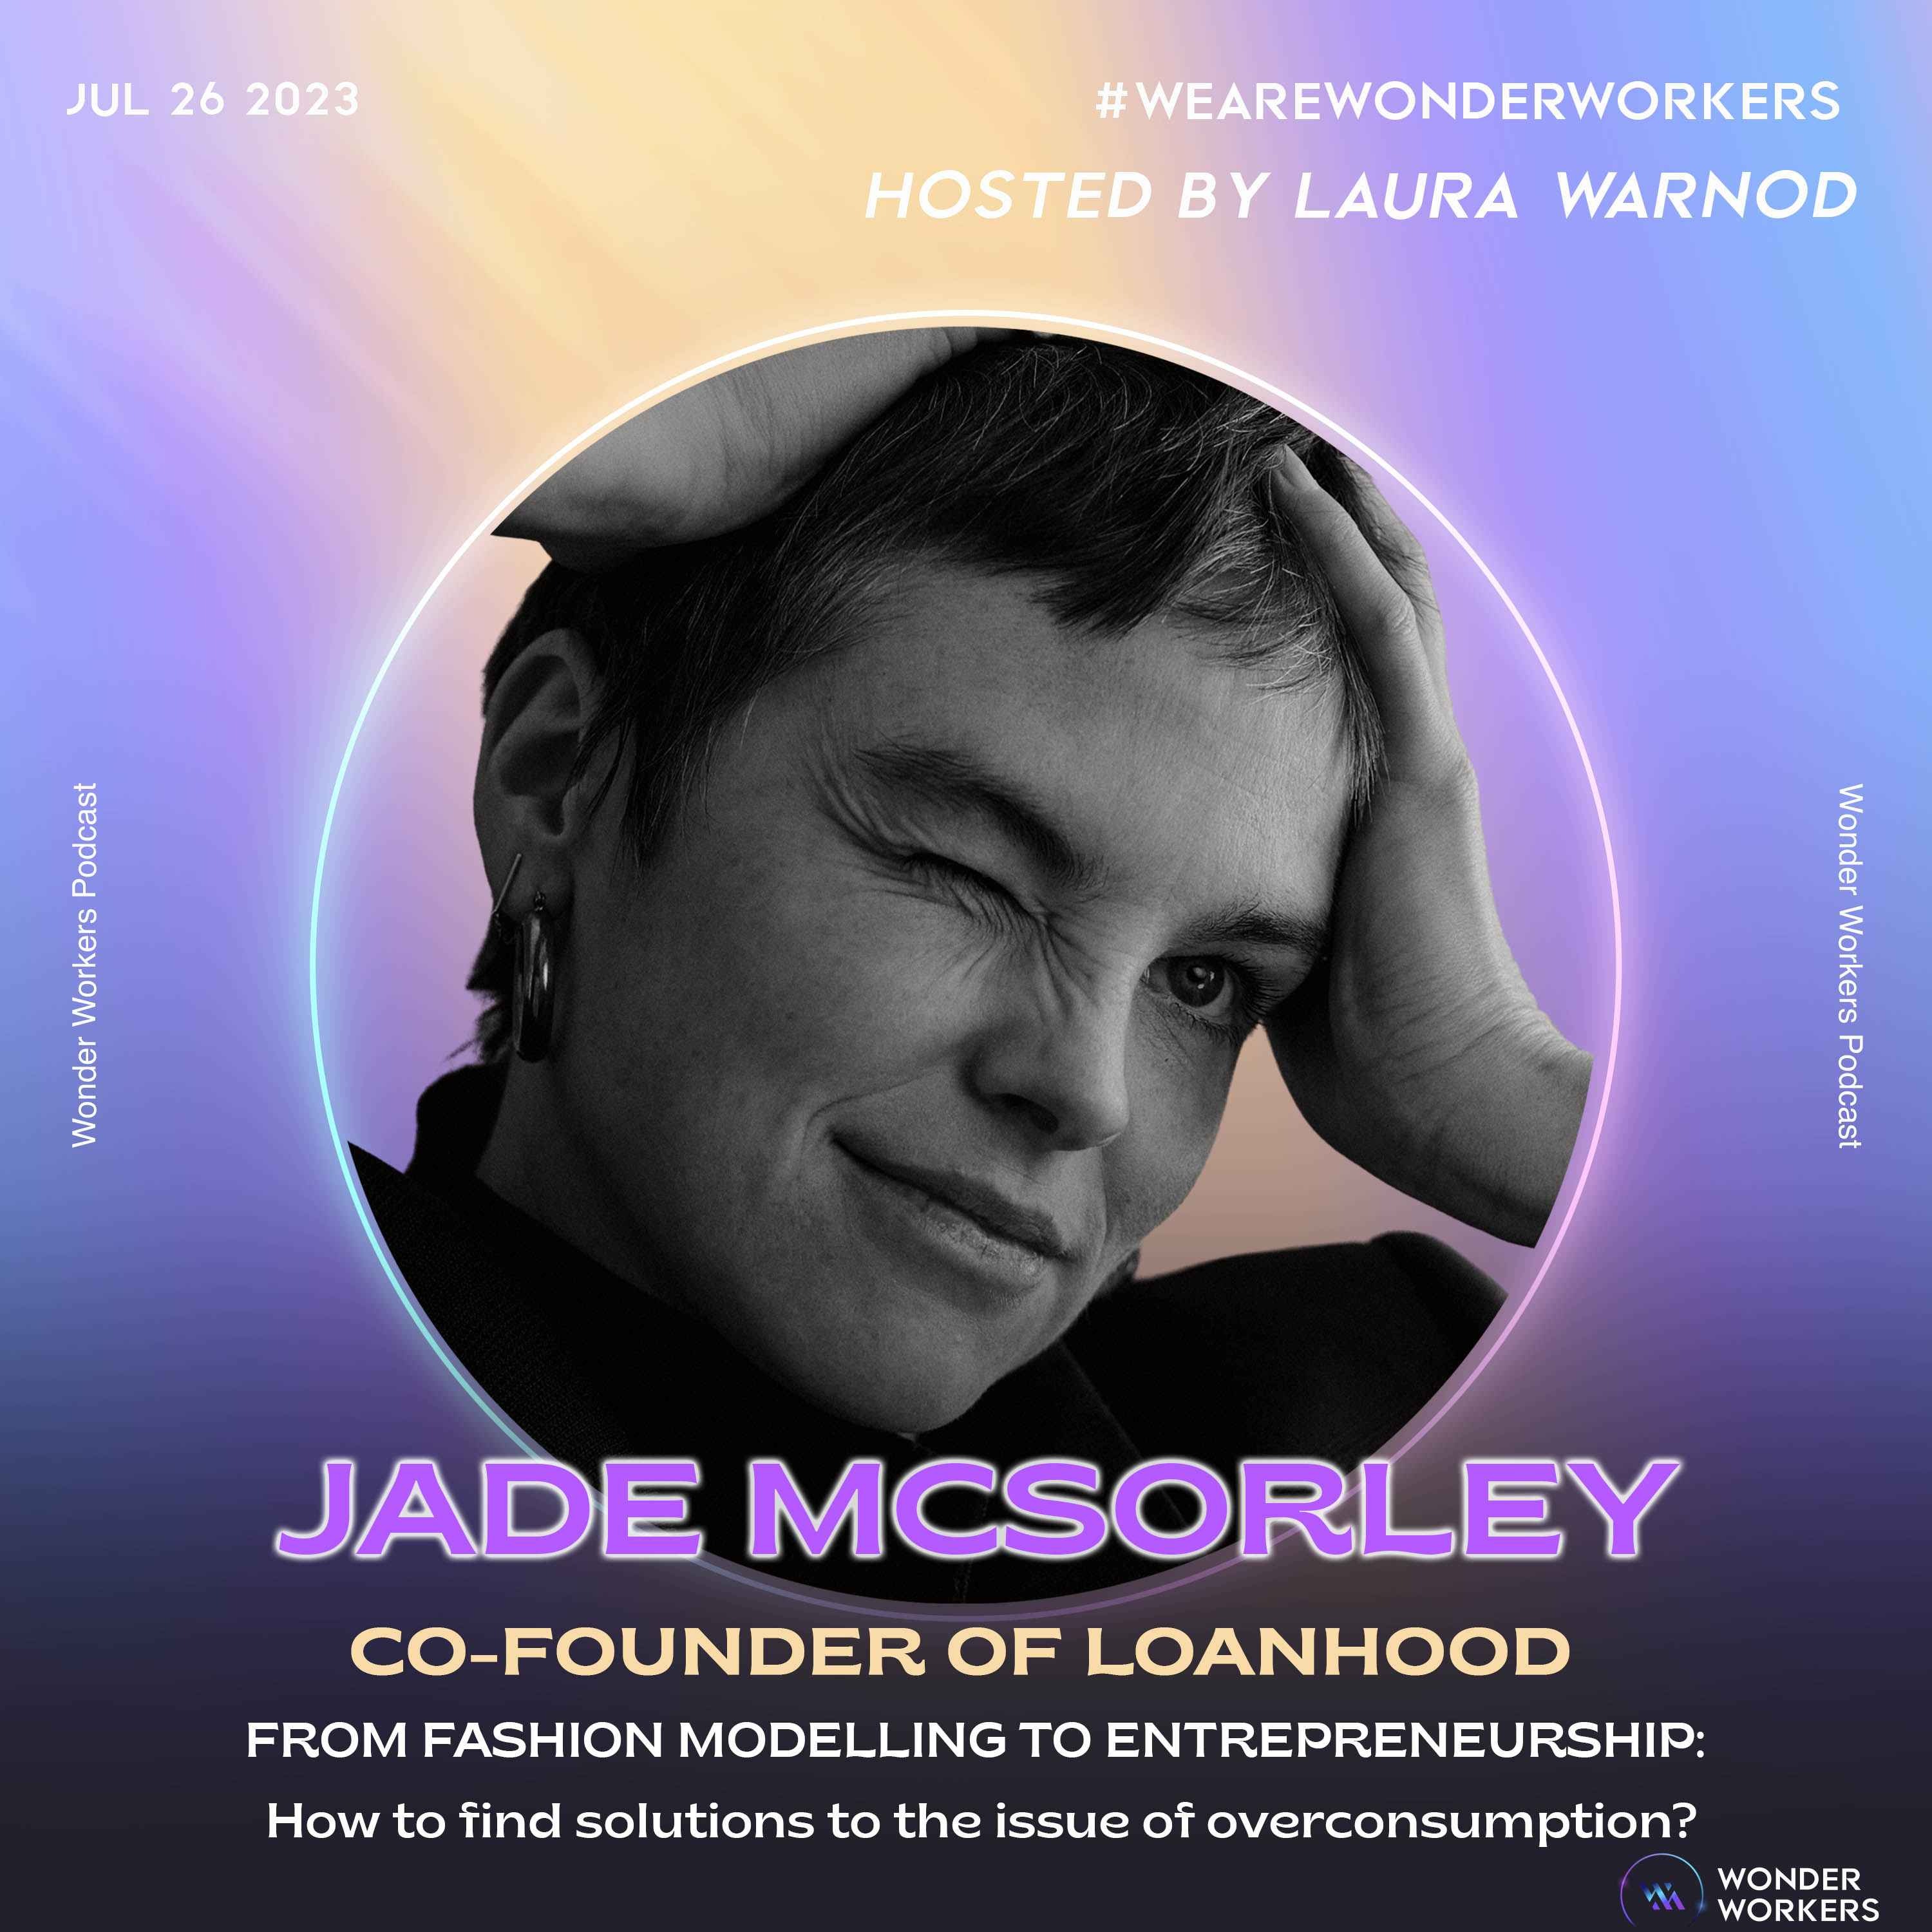 WonderWorkers 10: Jade McSorley, from fashion modelling to entrepreneurship - The superpower of being approachable